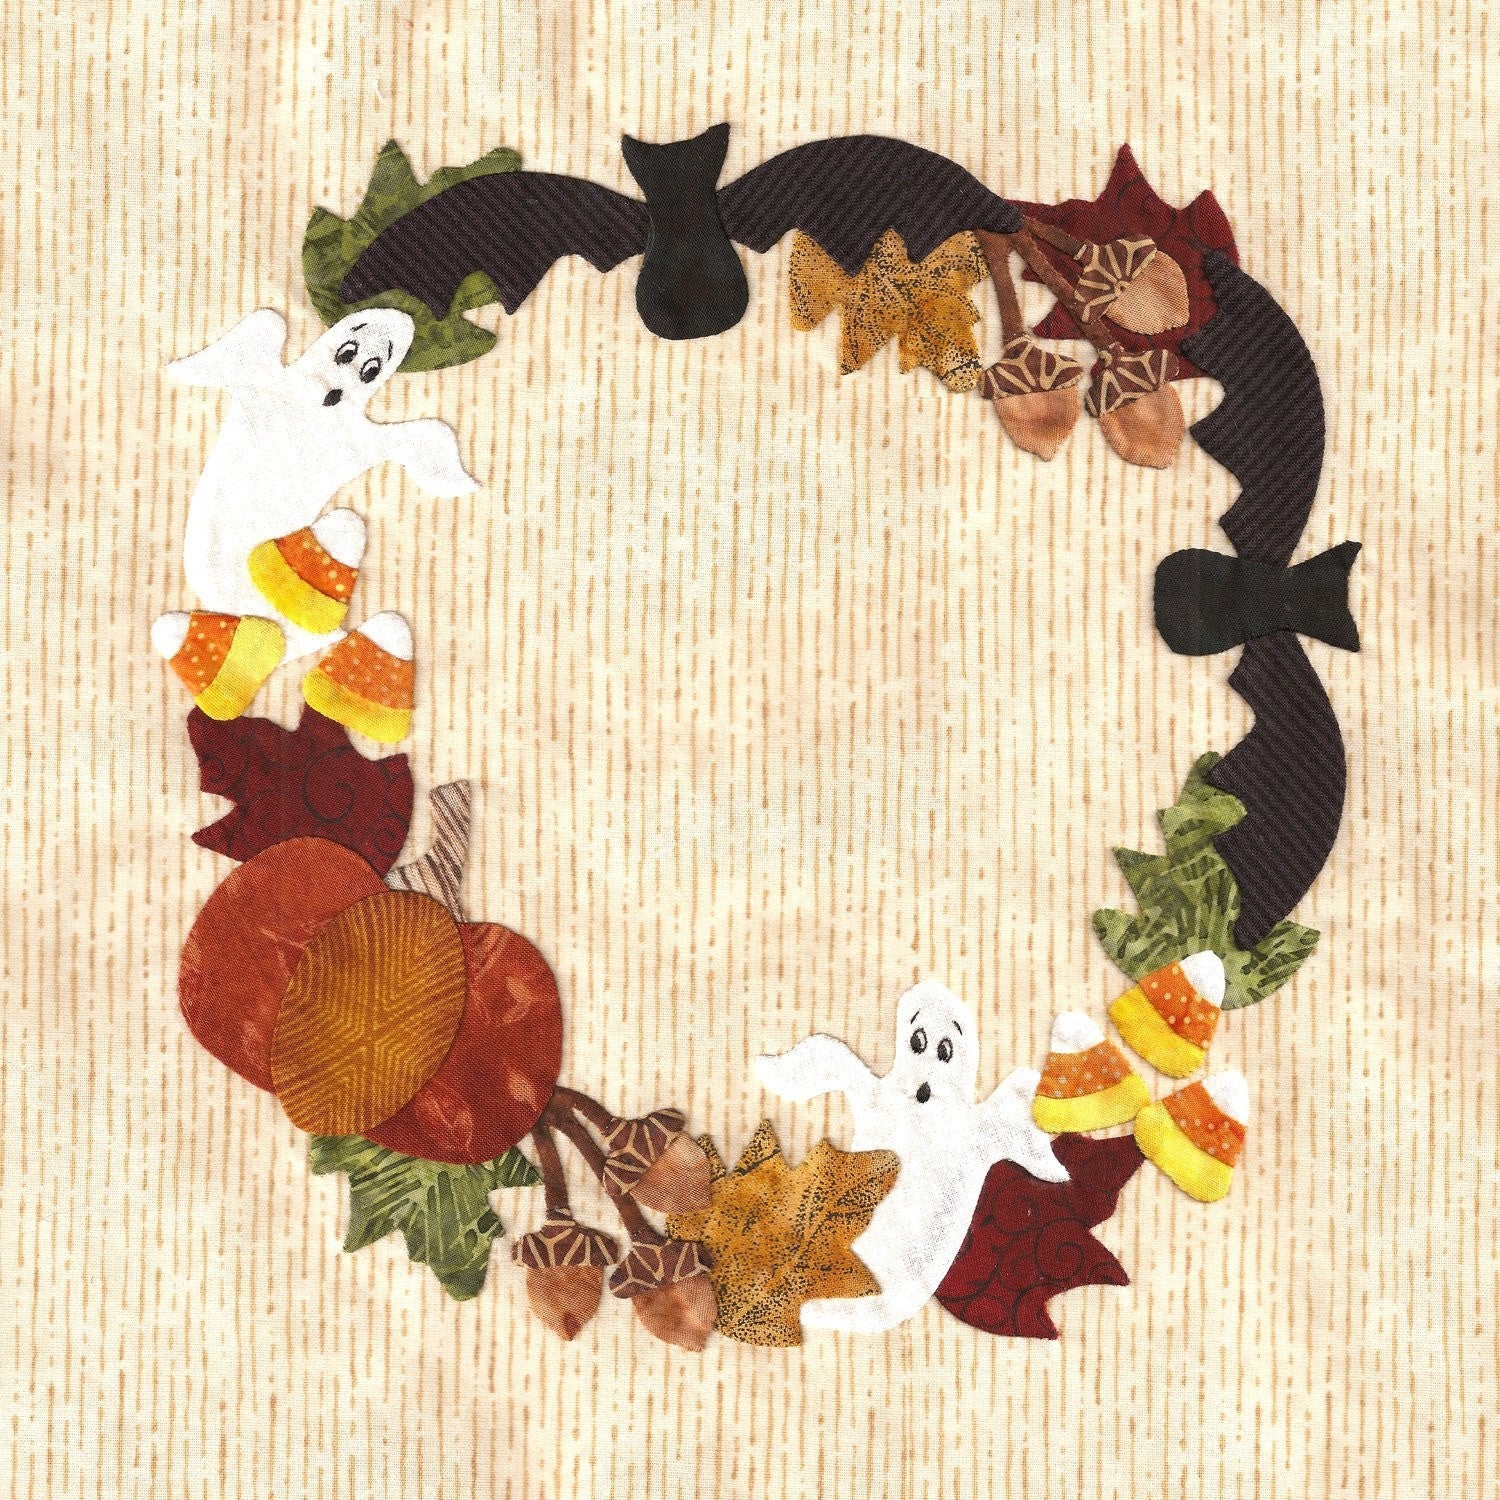 P3-1300 Block 5 Ghosts and Bats Wreath